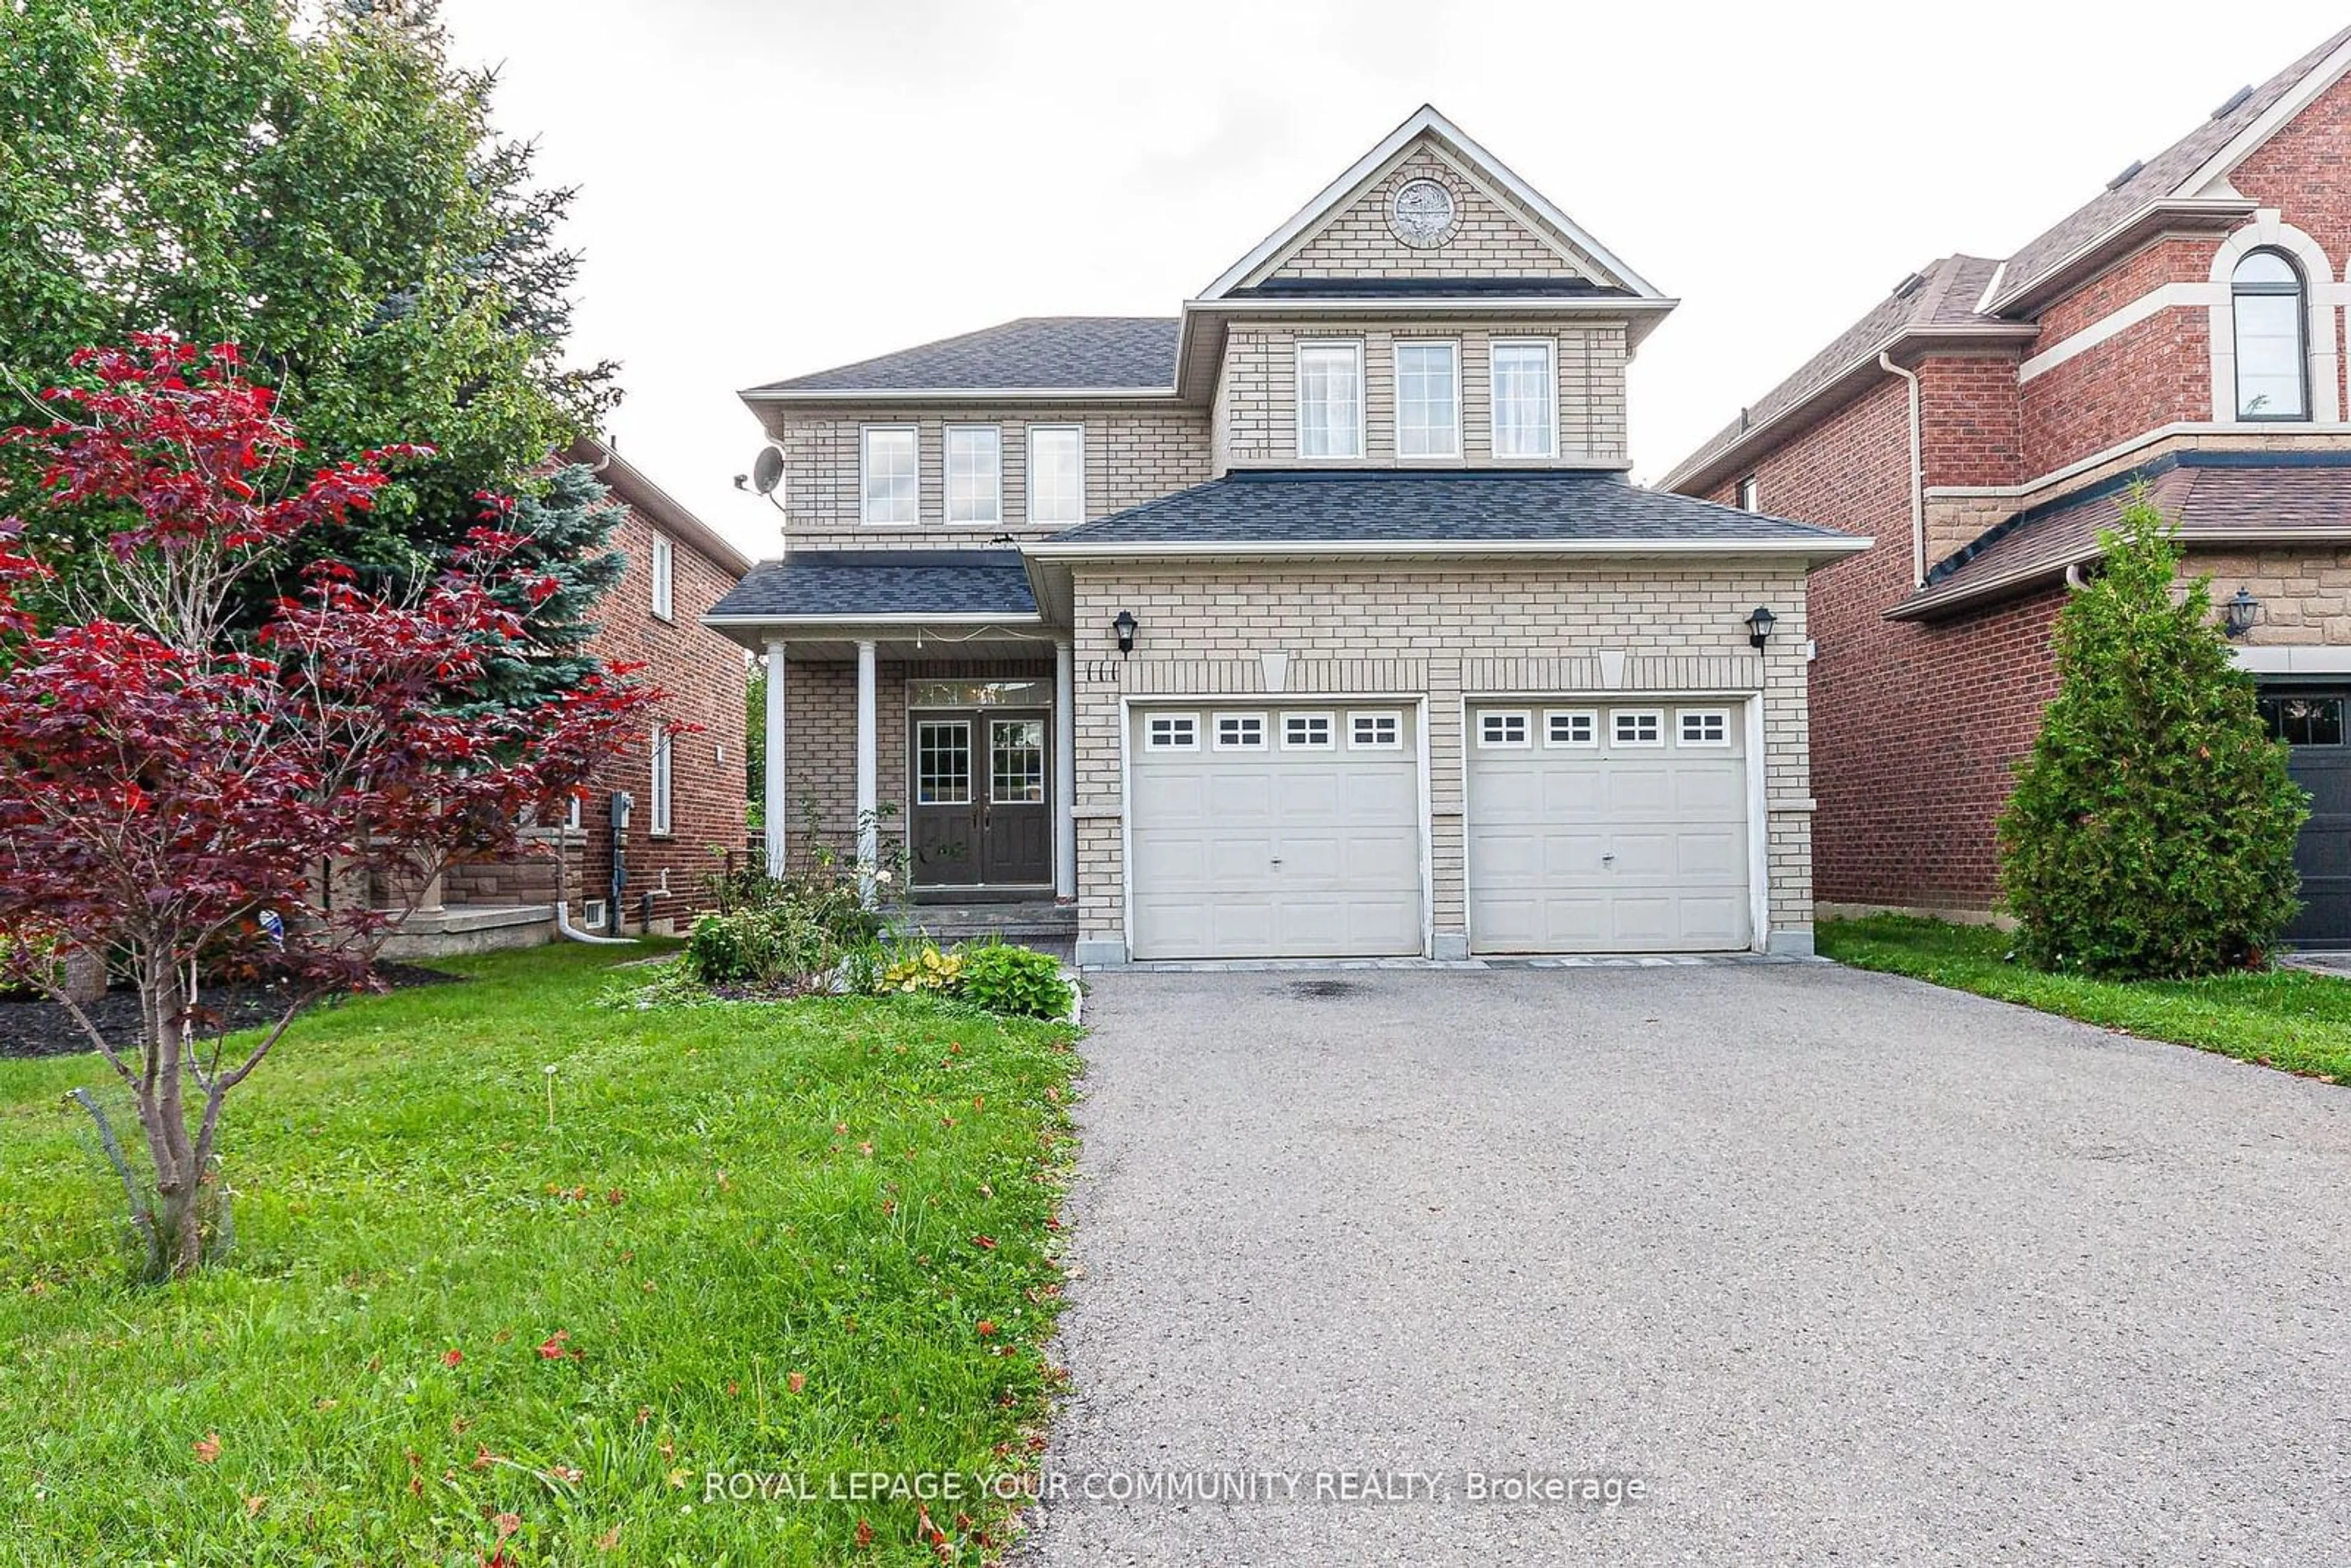 Home with brick exterior material for 111 Deerwood Cres, Richmond Hill Ontario L4E 4B3